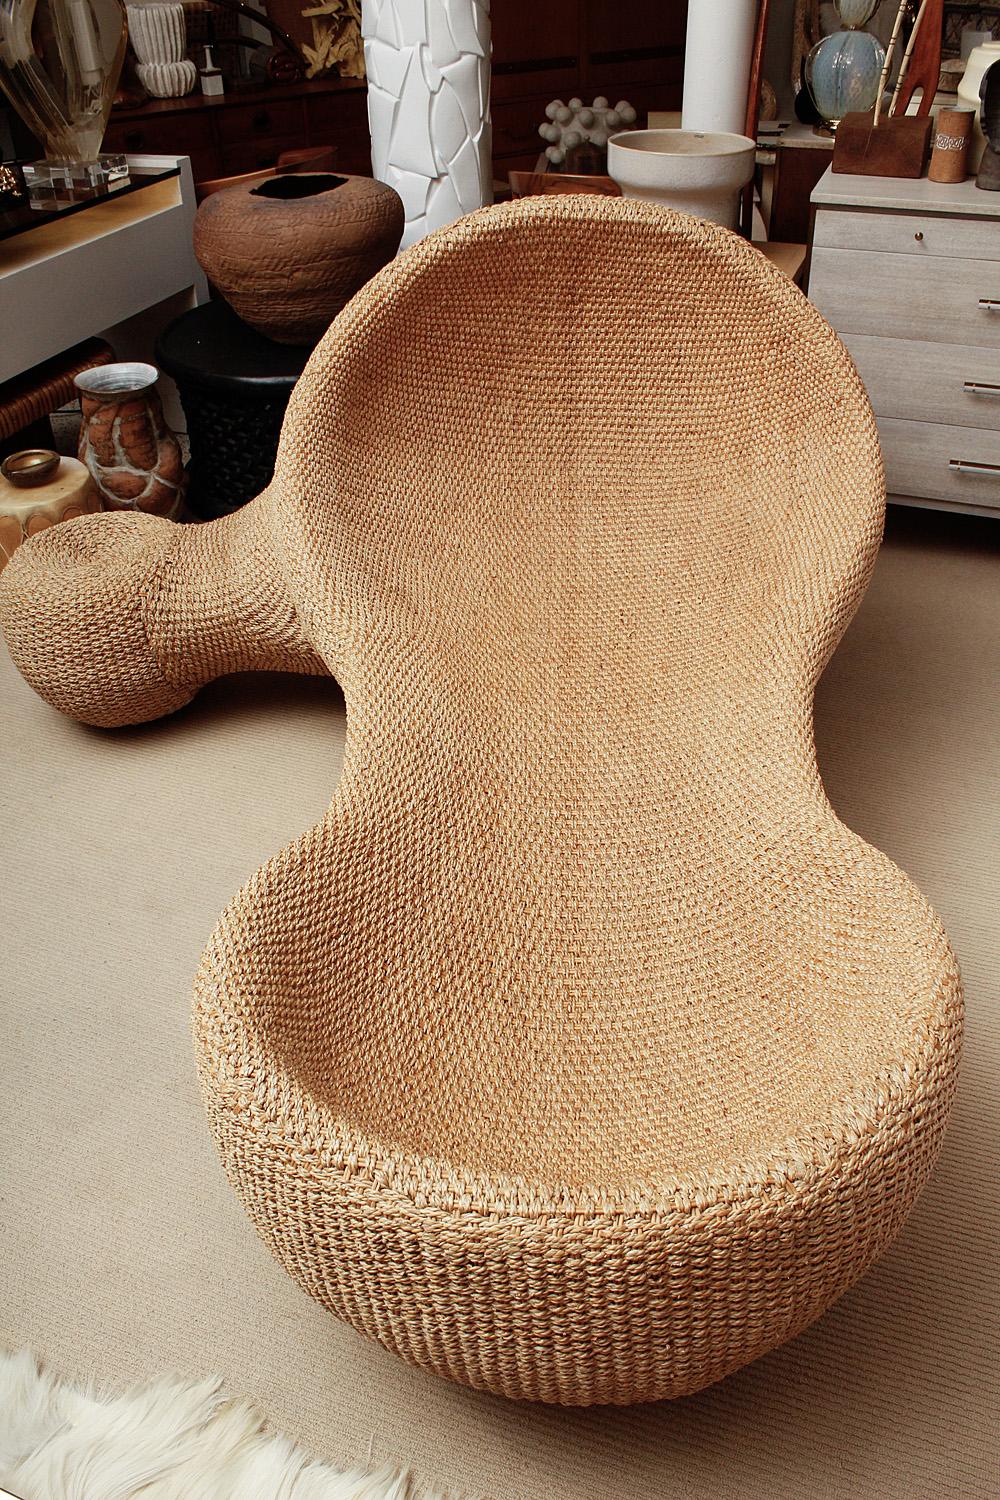 Organic Modern Modernist Woven Wicker and Rope Chaise Lounge